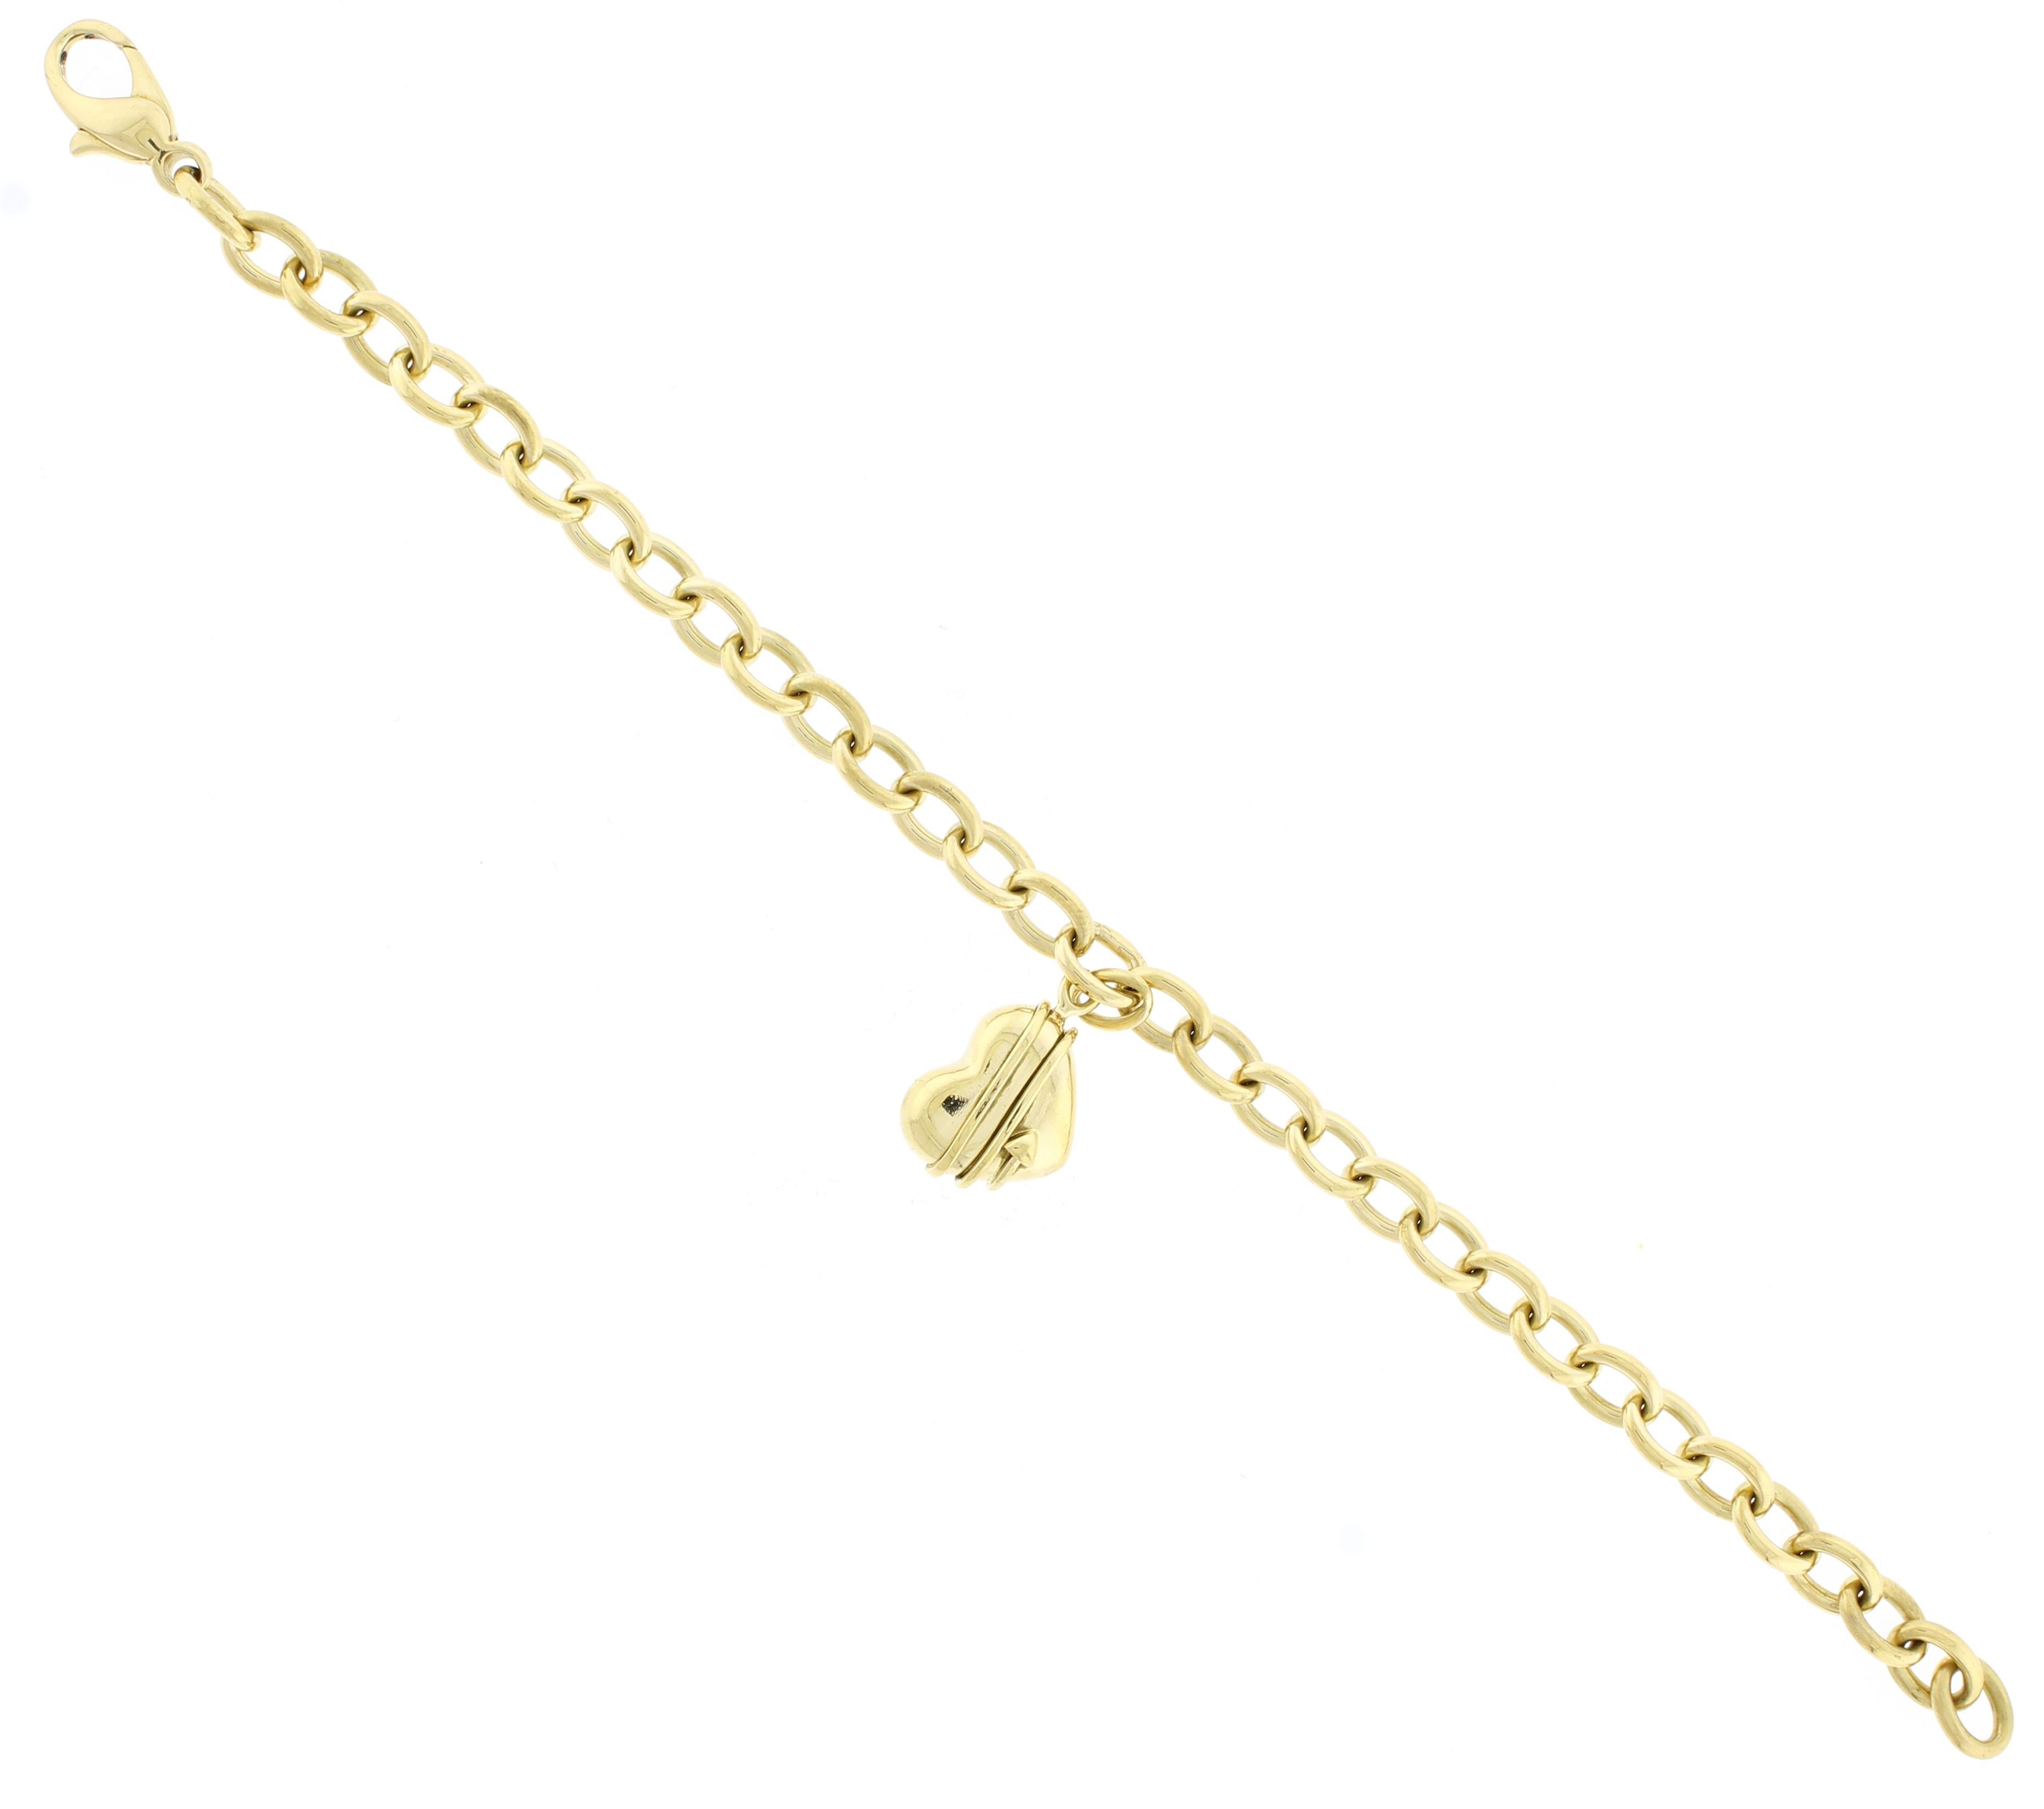 From Tiffany & Co, a gold  bracelet charm with a heart and cupid’s wrapped arrow wrapped.
• Designer: Tiffany & Co.
• Metal: 18 karat gold
• Circa: Late 20th Century
• Size: 7 ½ inches long
• 27.1 grams
• Packaging:  Tiffany pouch
• Condition: Very